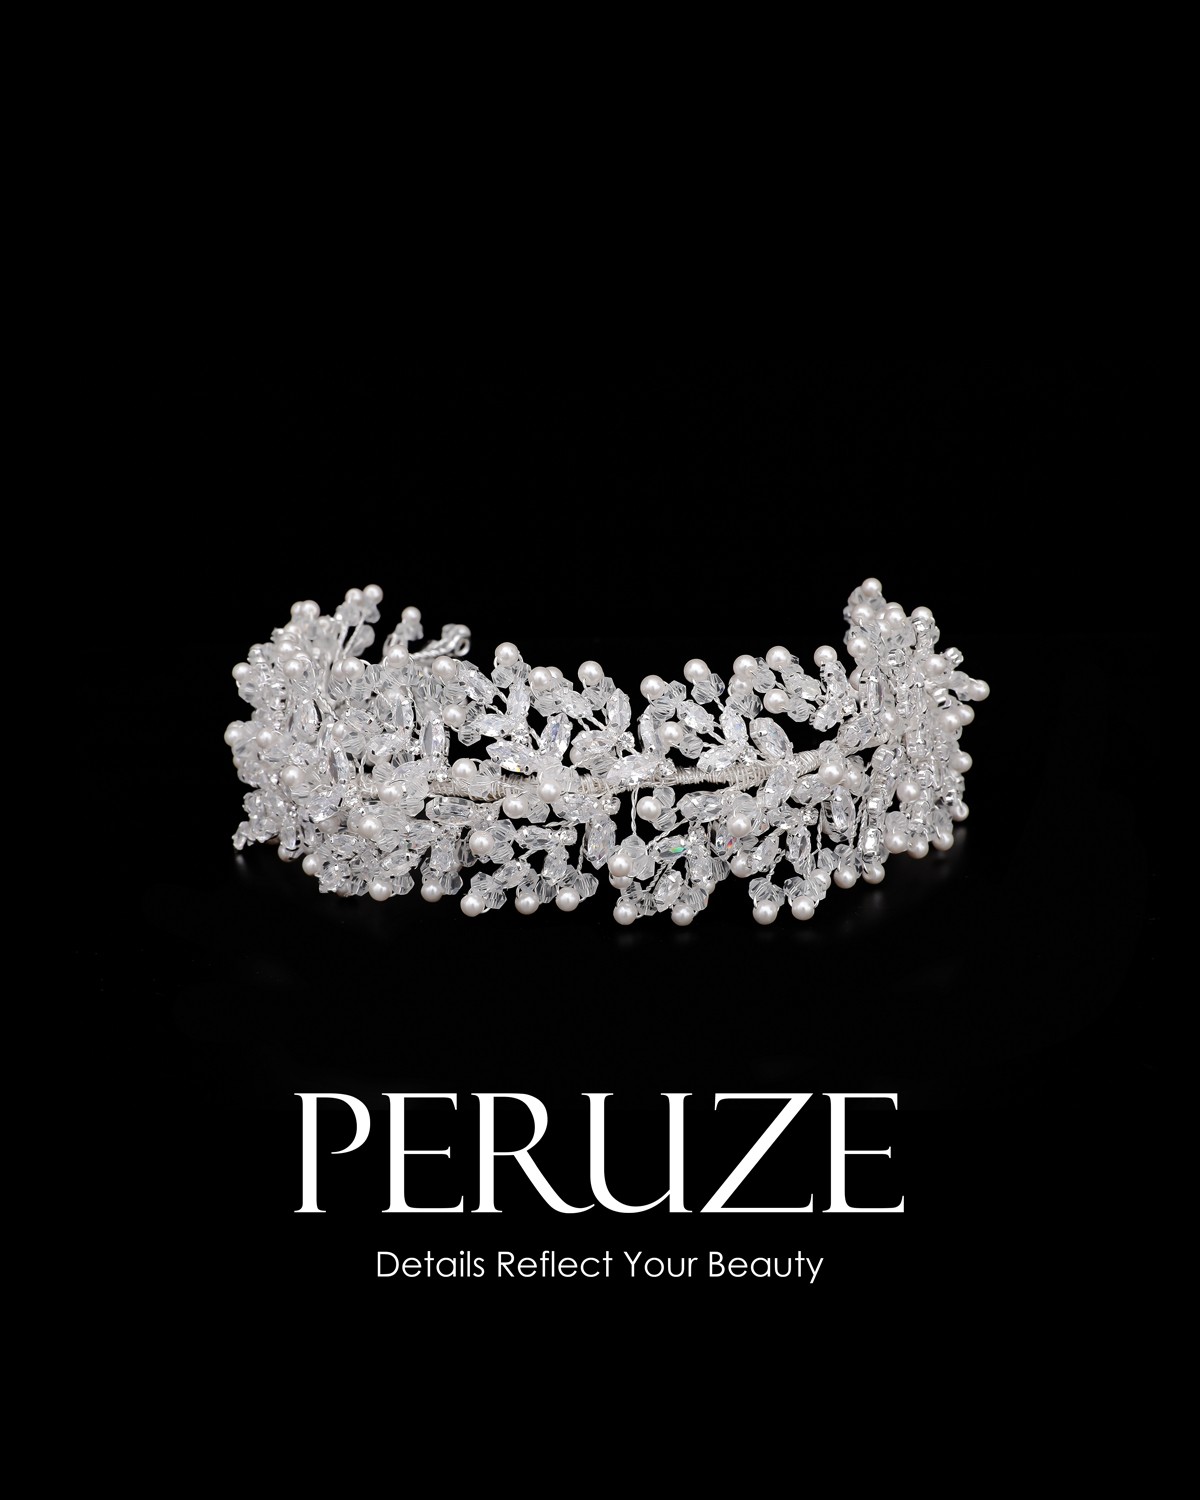 Peruze Zircon Stone And Crystal Beads And Pearls Hair Accessories Buy Now.